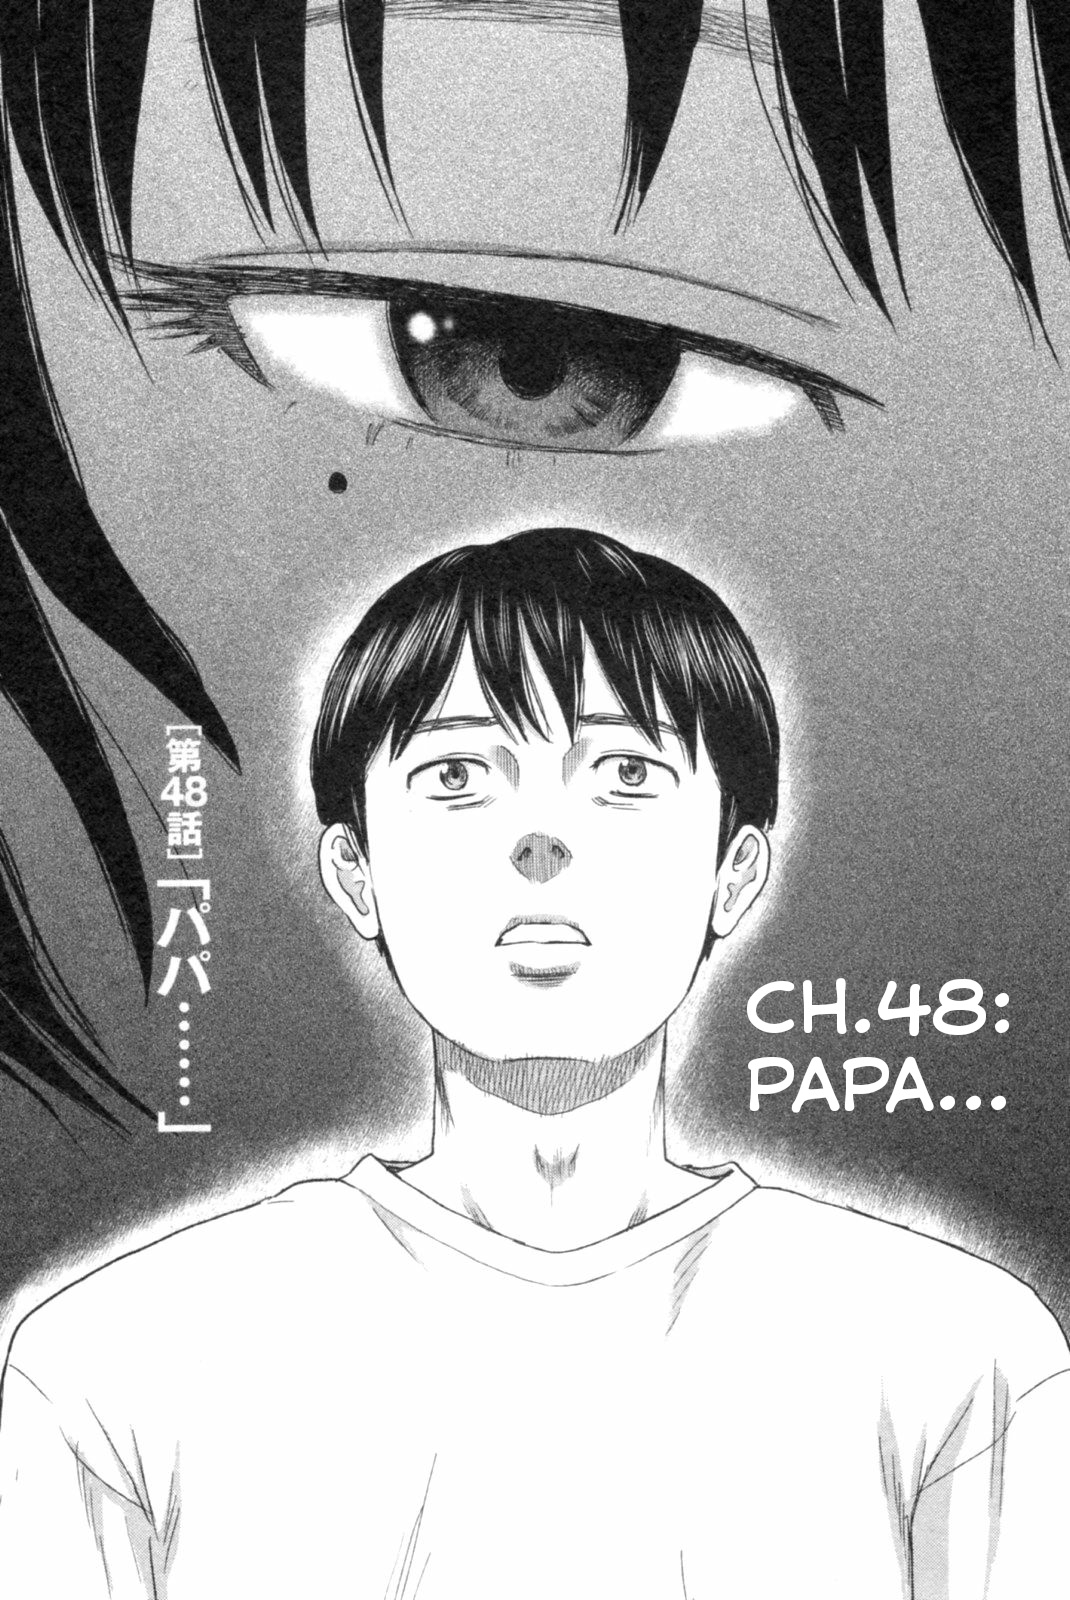 Hyouryuu Net Cafe Vol.6 Chapter 48: Papa... - Picture 1